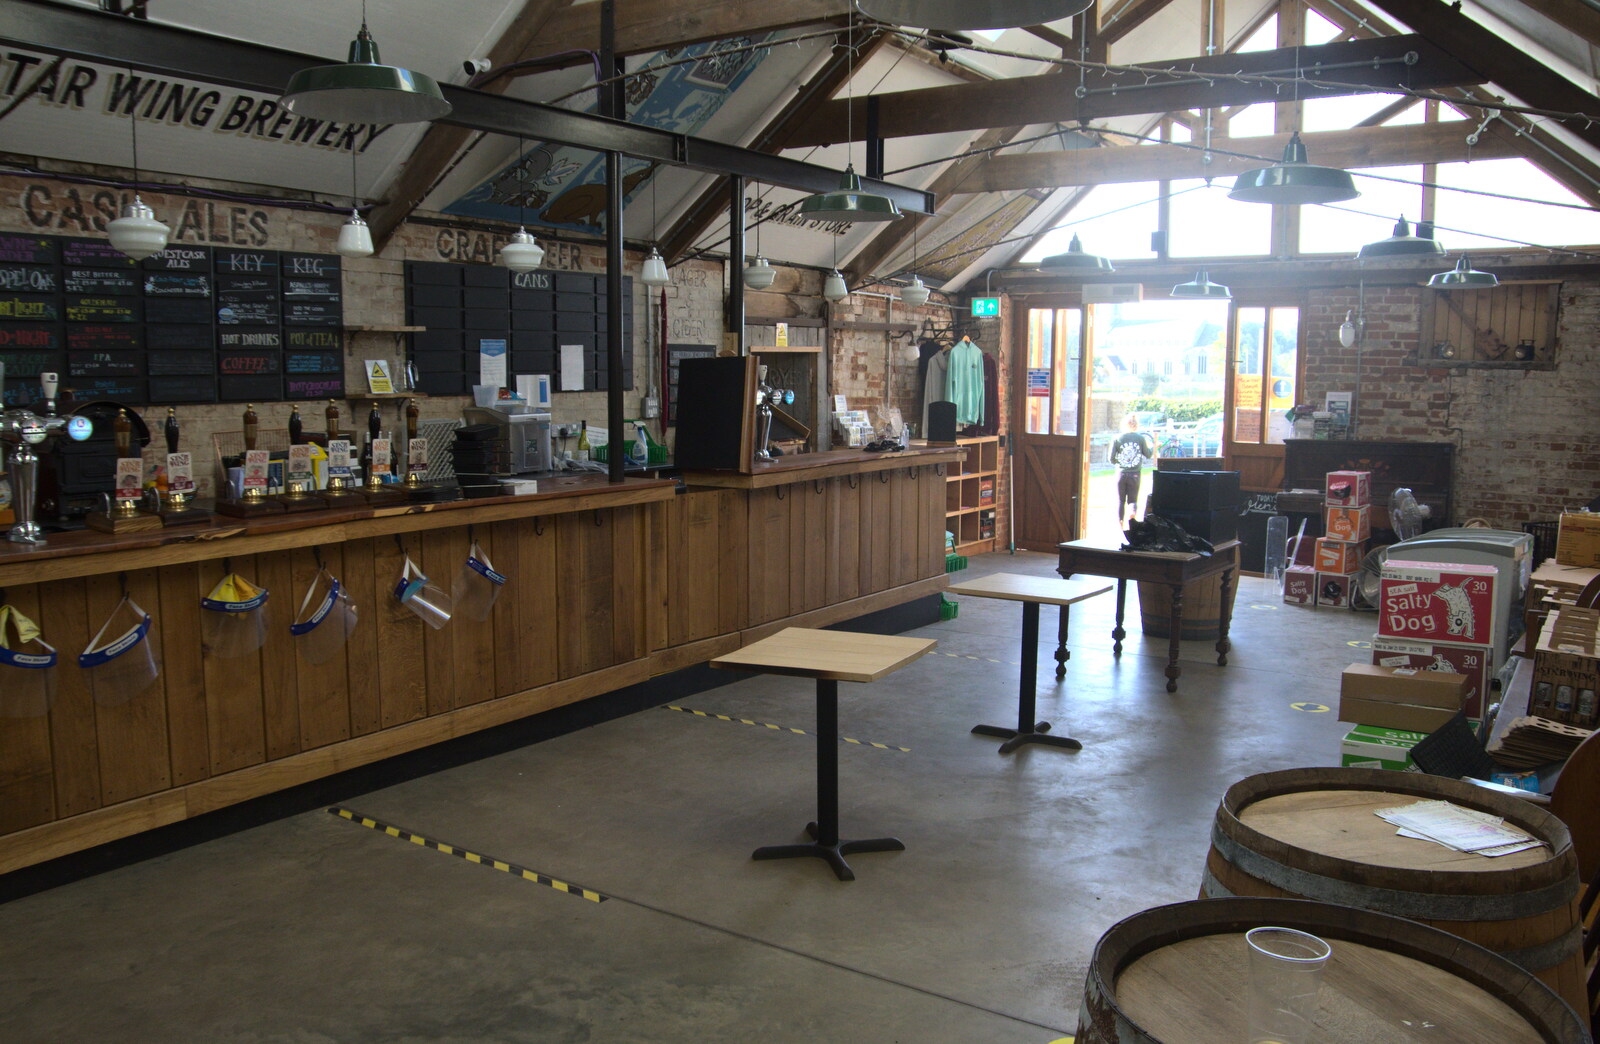 Inside Star Wing's empty Tap Room from Star Wing's Hops and Hogs Festival, Redgrave, Suffolk - 12th September 2020